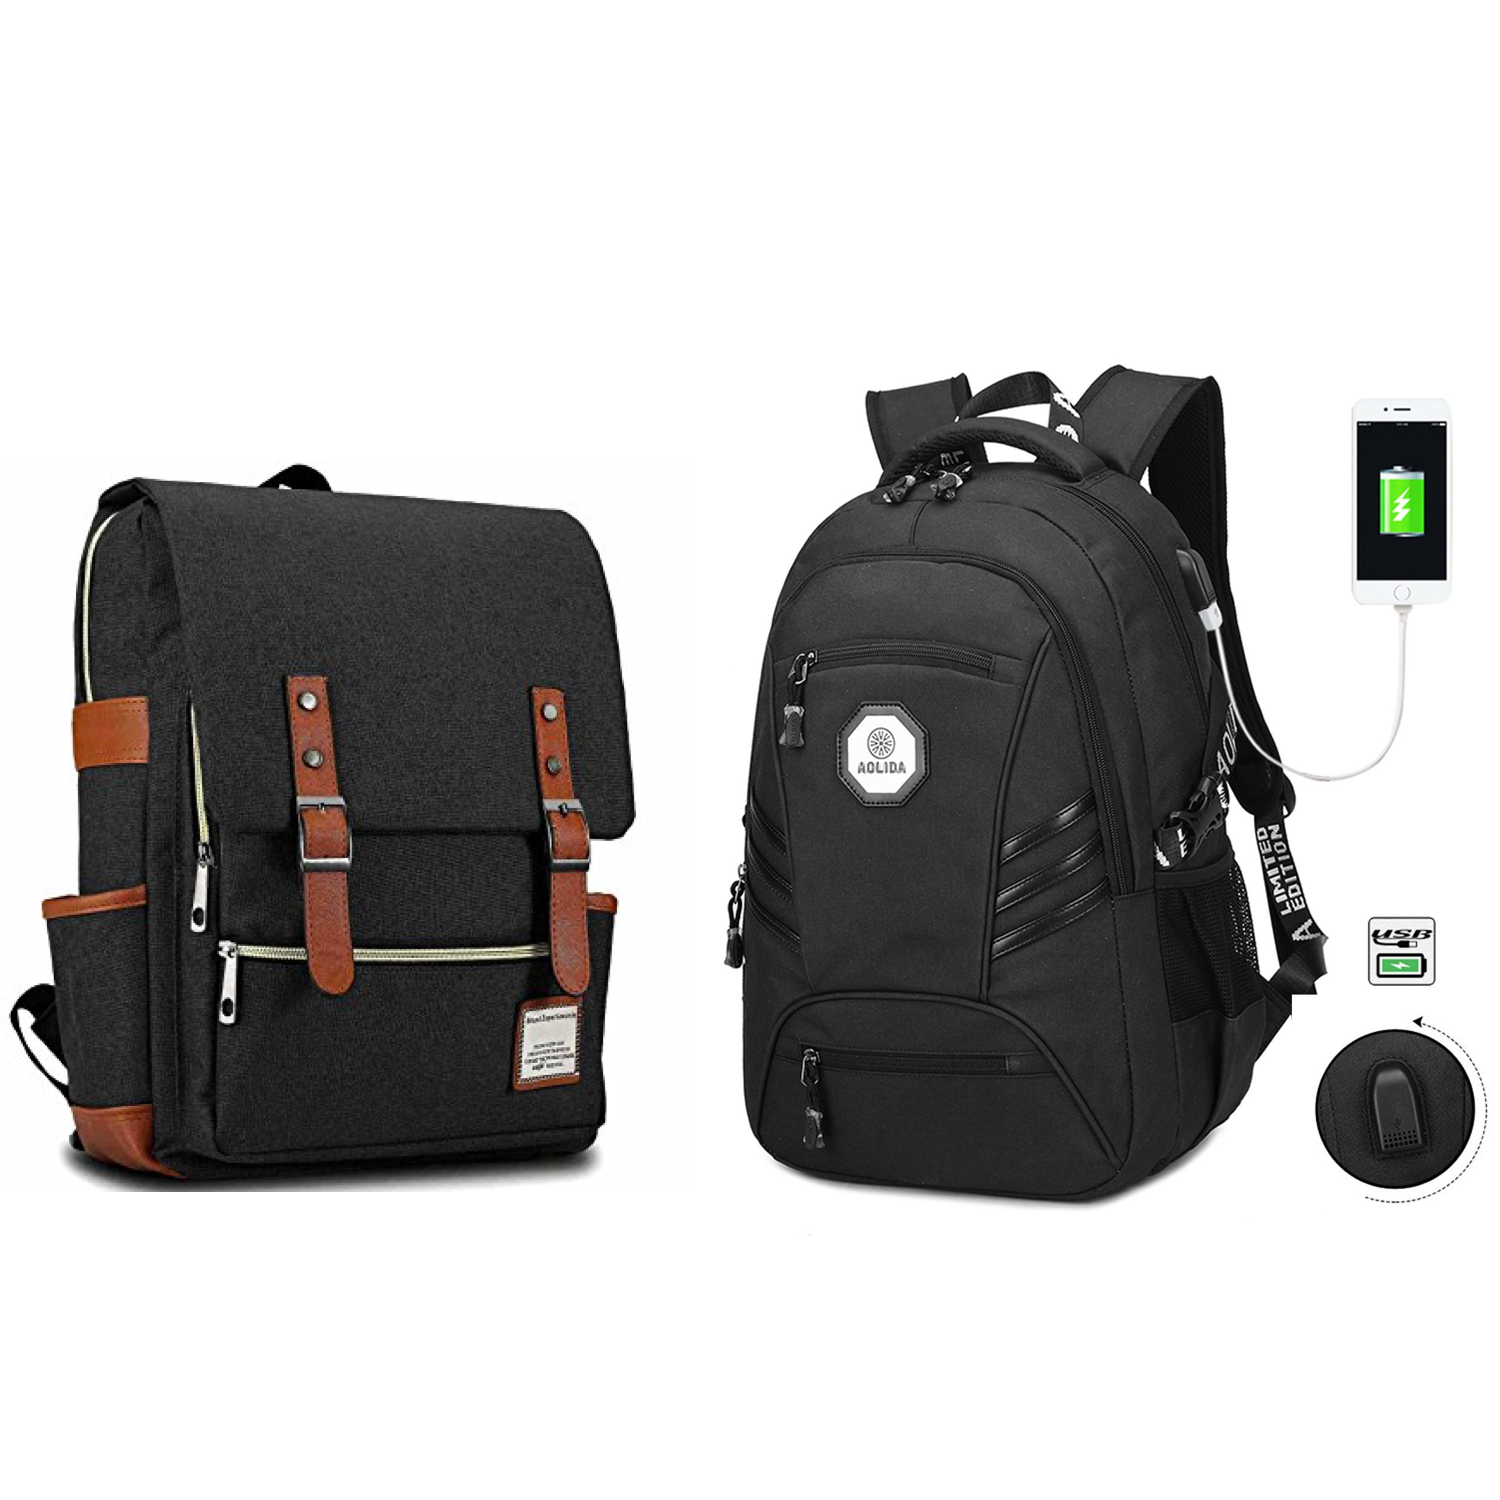 Best Work Backpack Buying Guide for Professionals